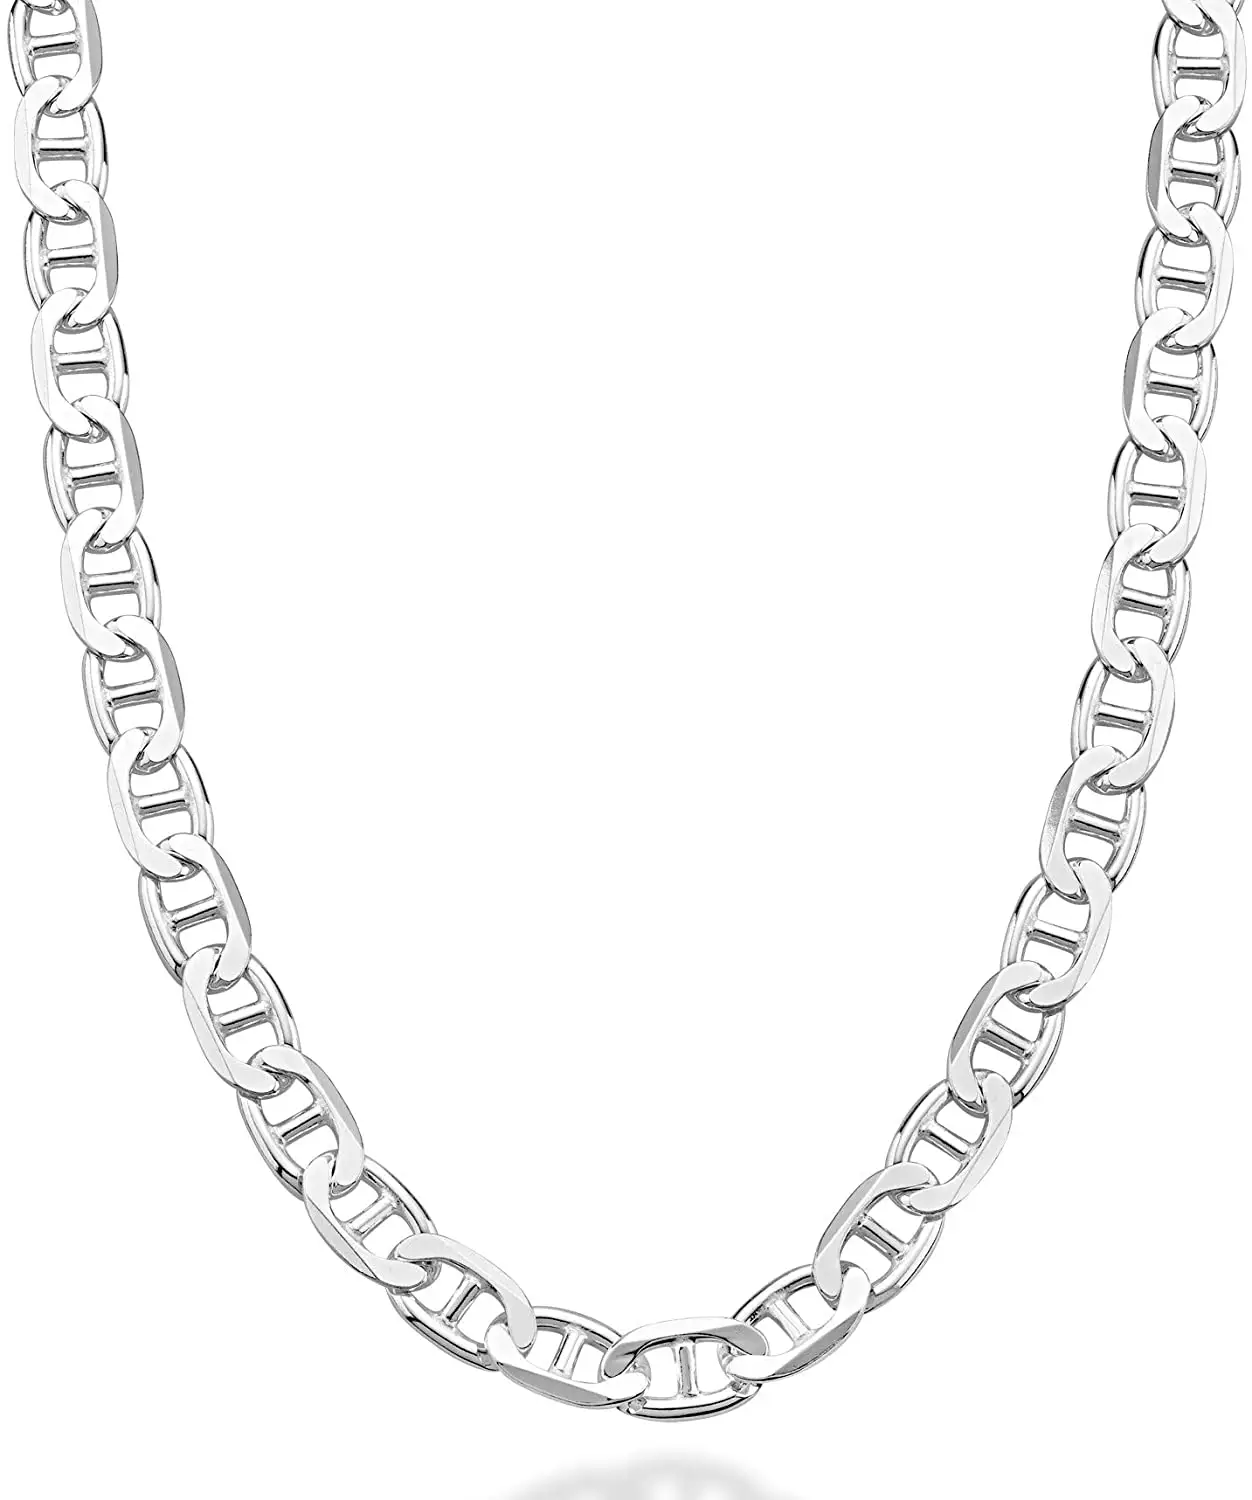 Solid 925 Sterling Silver Italian 3mm 5mm 7mm Diamond-Cut Solid Flat Mariner Link Chain Necklace for Women Men 20 Inch